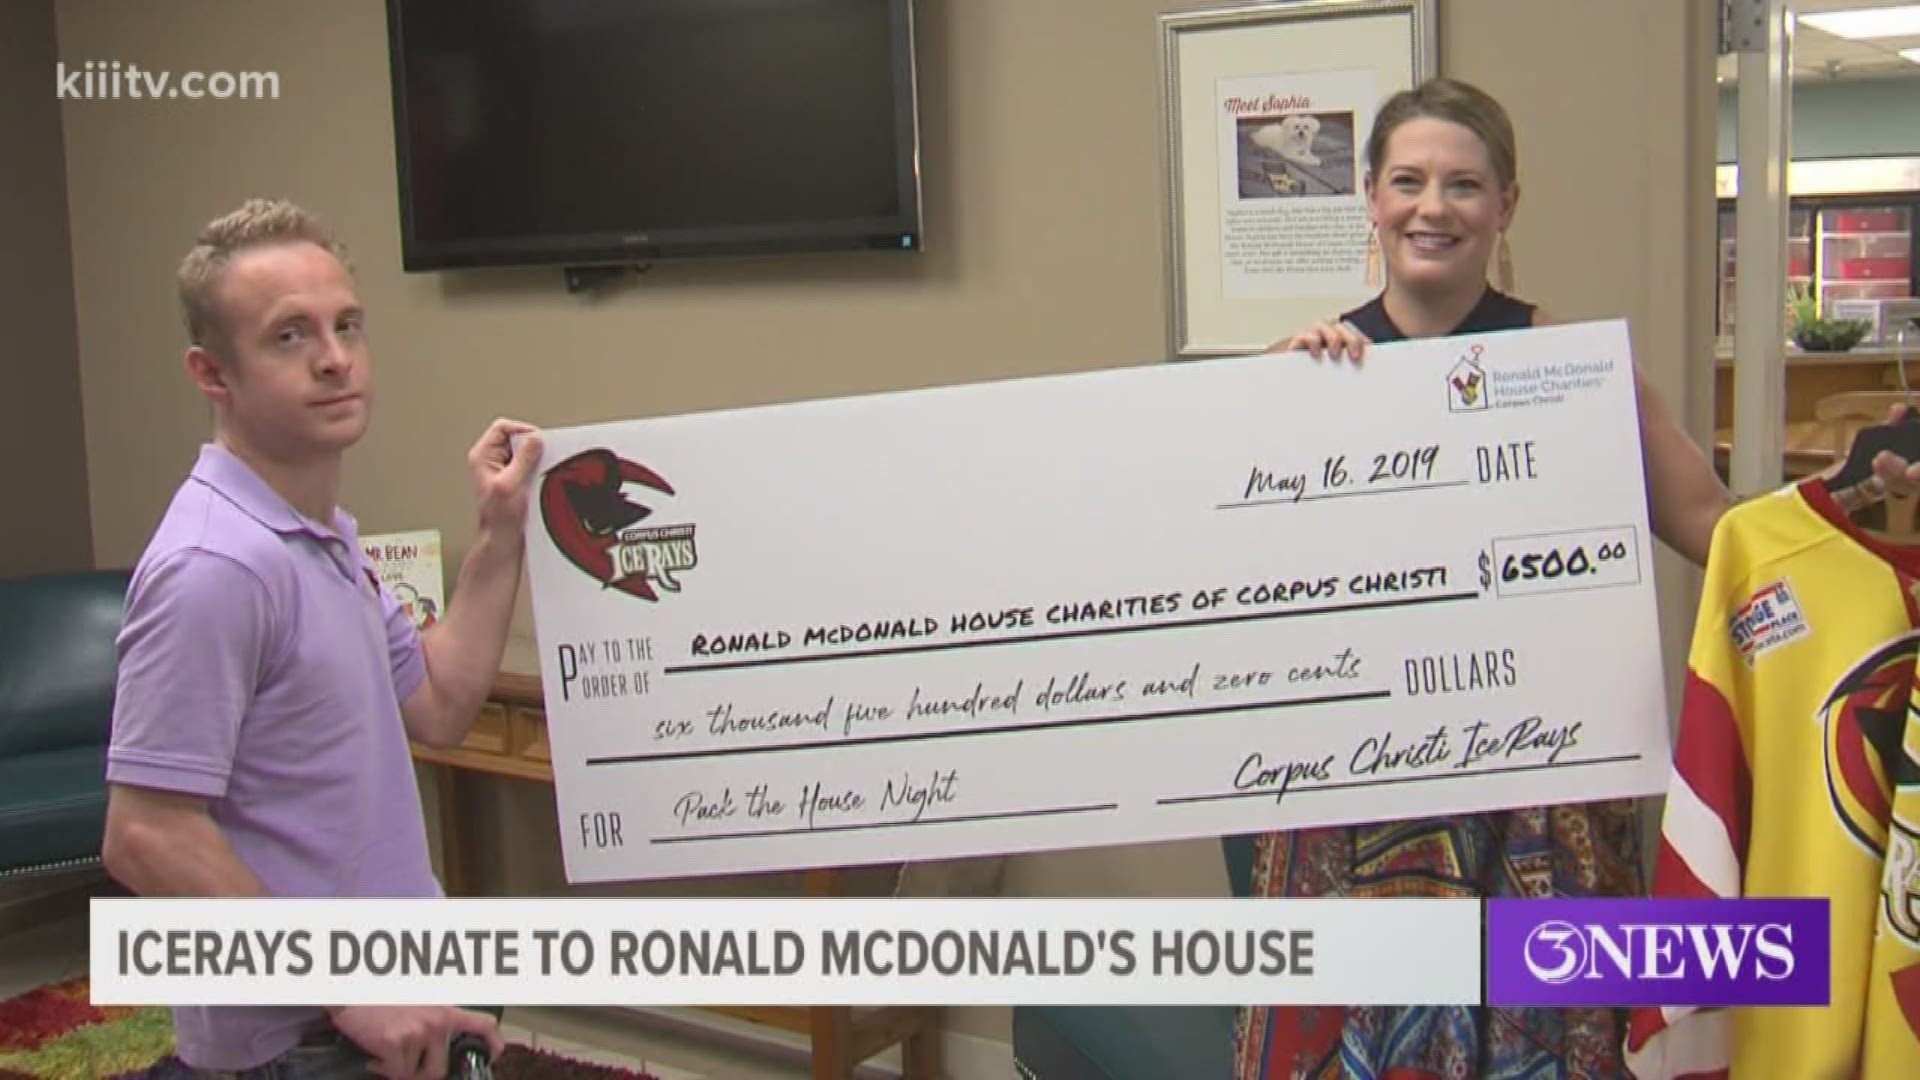 All the money was raised during the last game of the season through an auction of 24 jerseys modeled after Ronald McDonald himself.